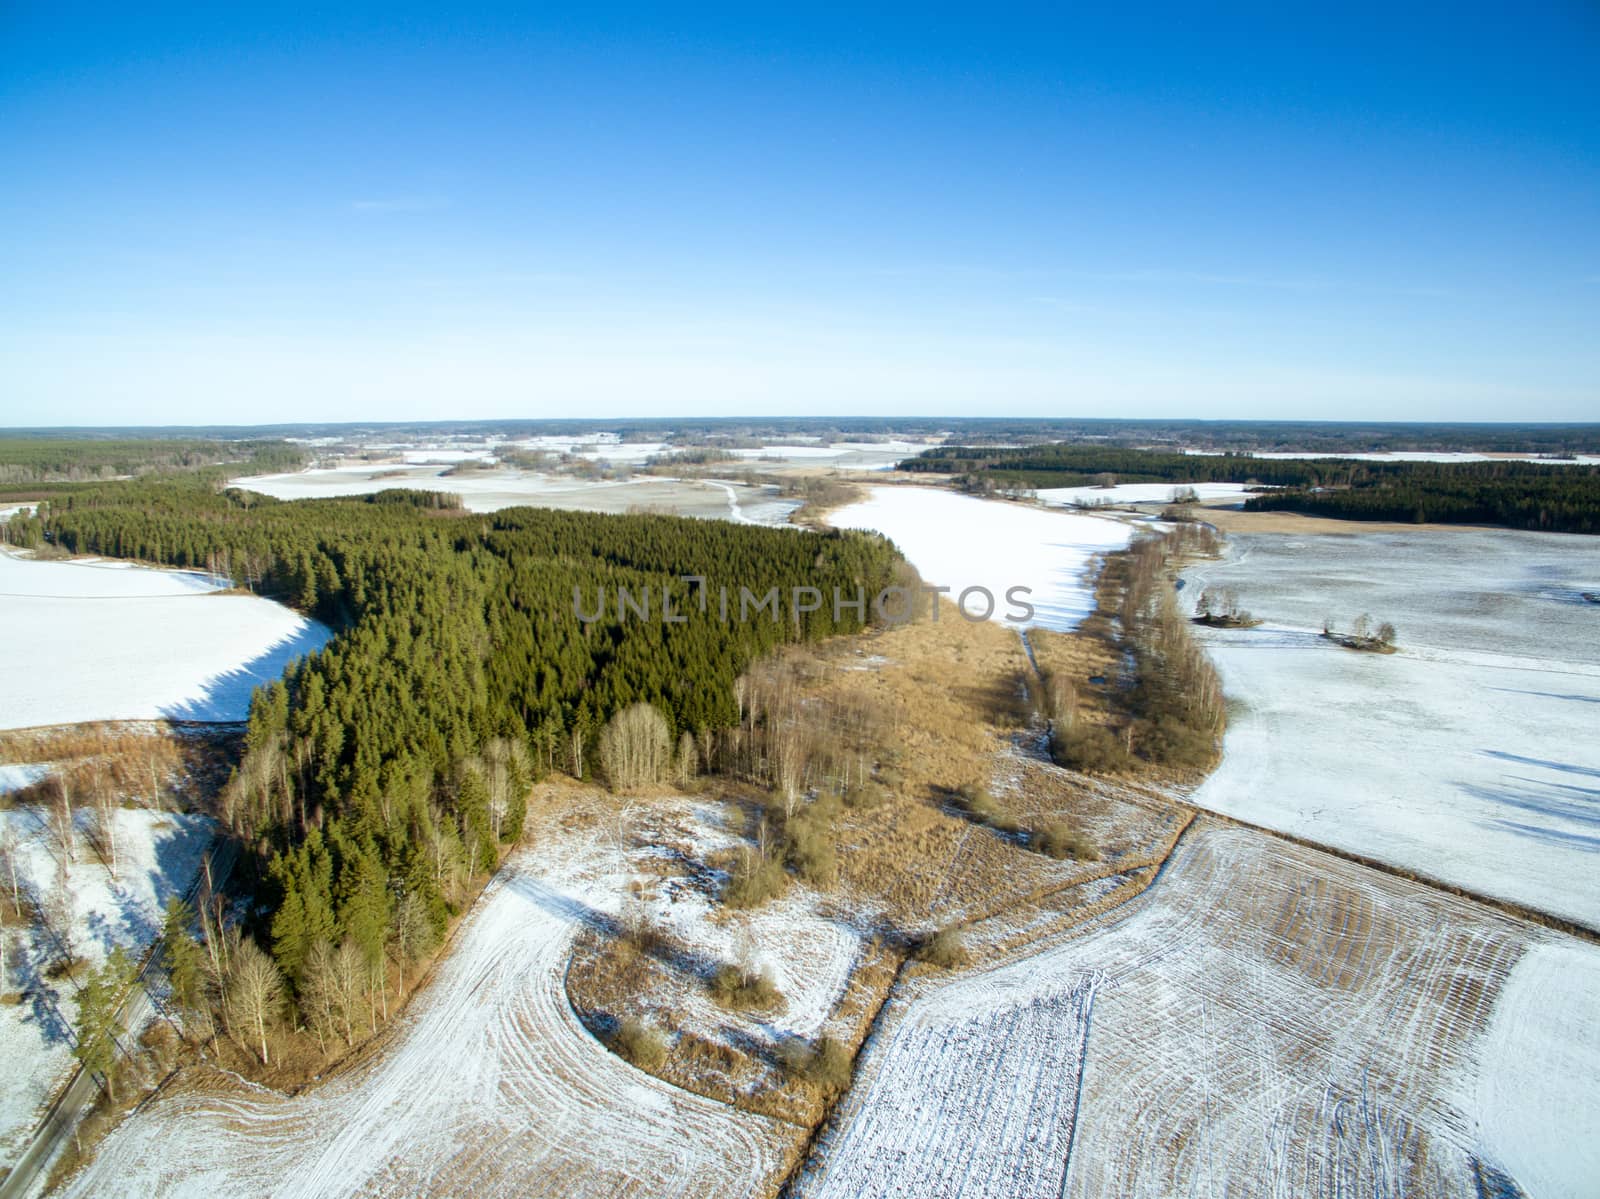 Wintery landscape with blue sky by thomas_males